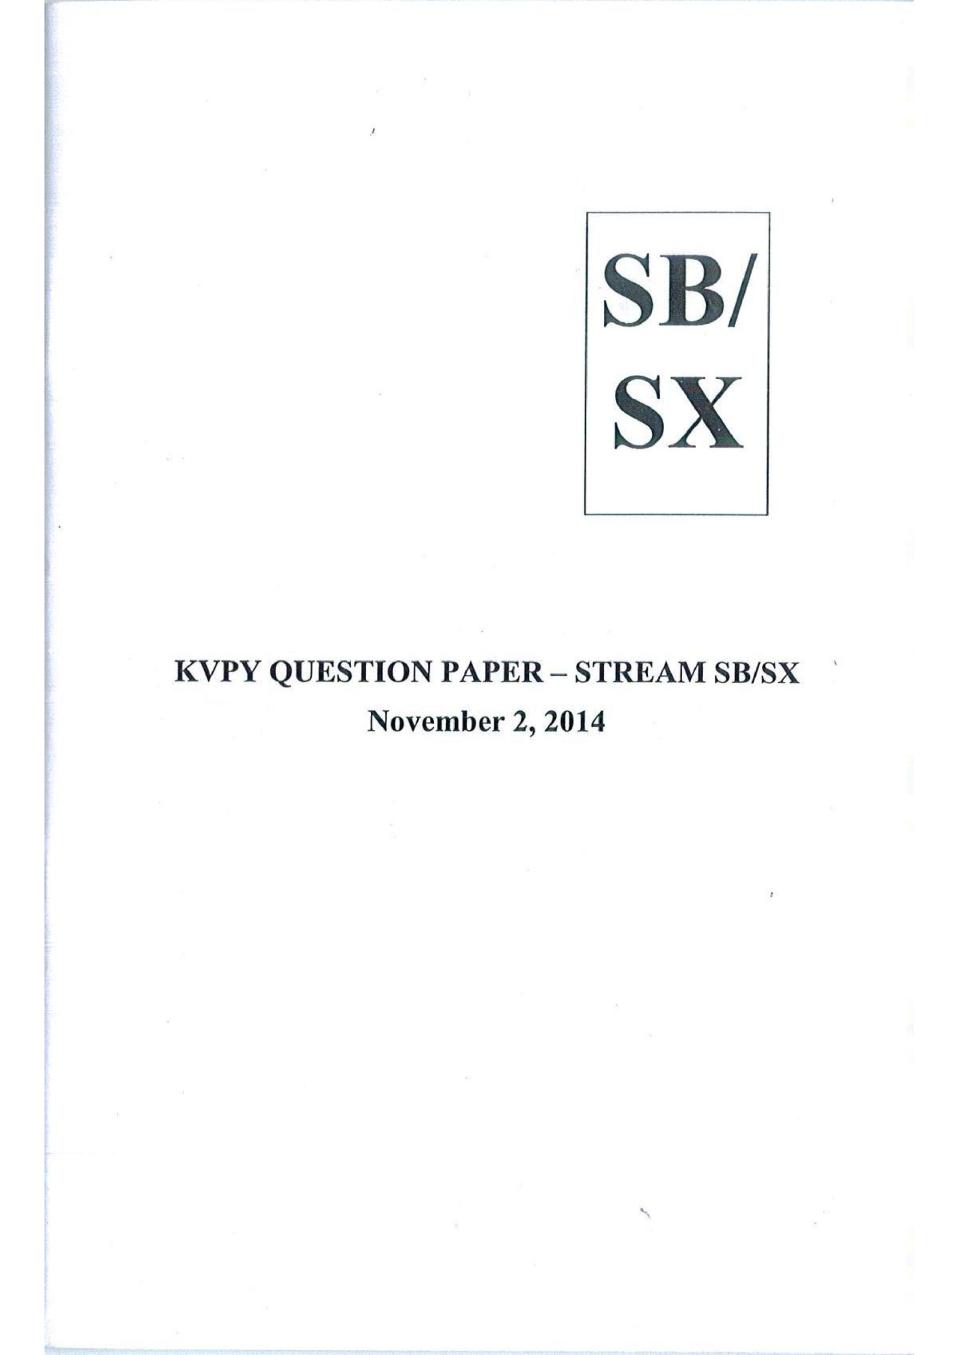 KVPY 2014 Question Paper with Answer Key for SB/SX Stream - Page 1